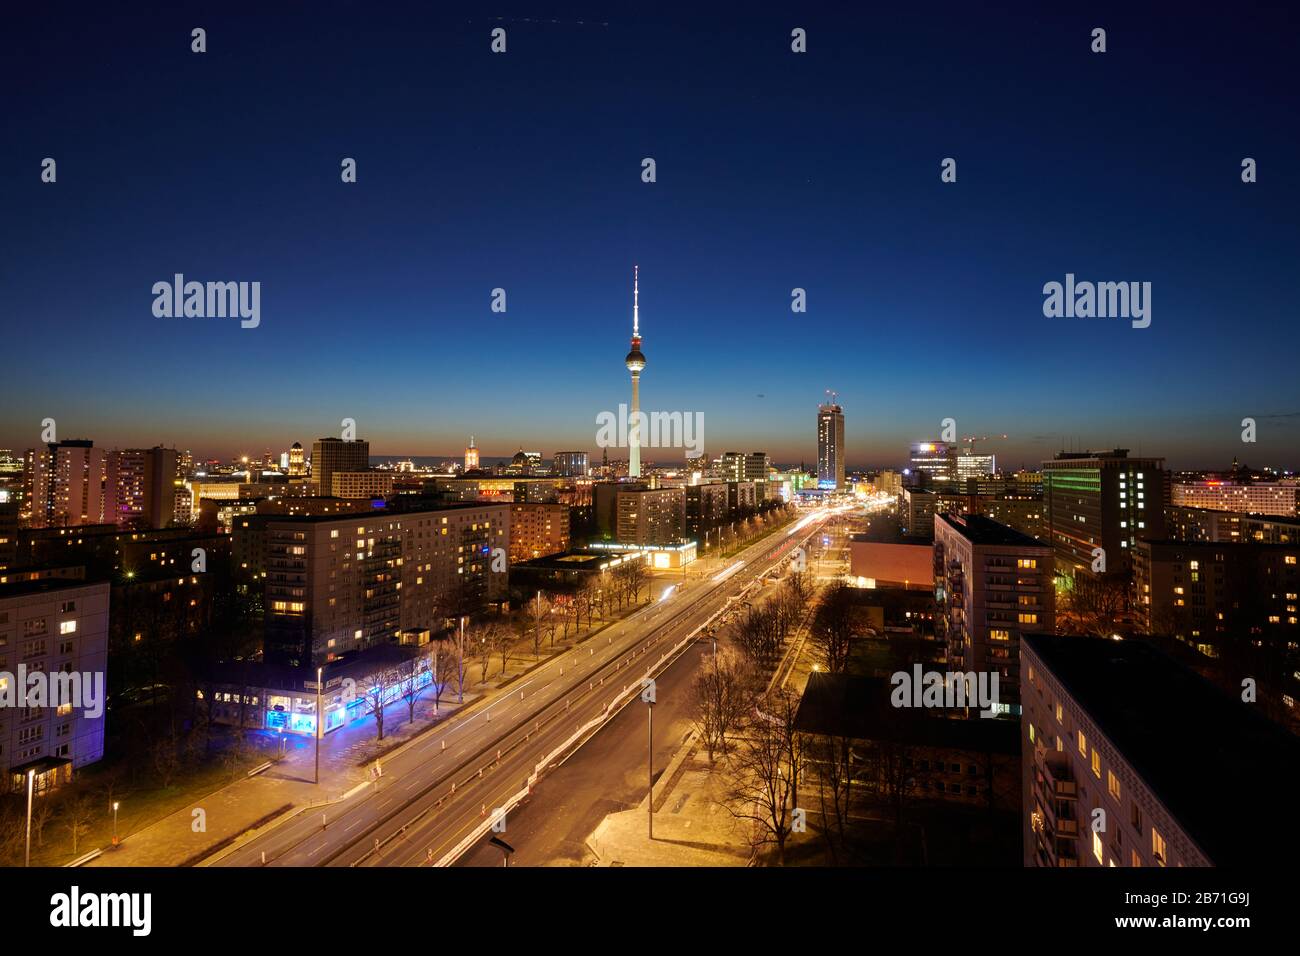 Berlin, Germany. 12th Mar, 2020. Evening view of the city centre with the television tower and Karl-Marx-Allee with the Park Inn Hotel (centre). Credit: Annette Riedl/dpa-Zentralbild/ZB/dpa/Alamy Live News Stock Photo